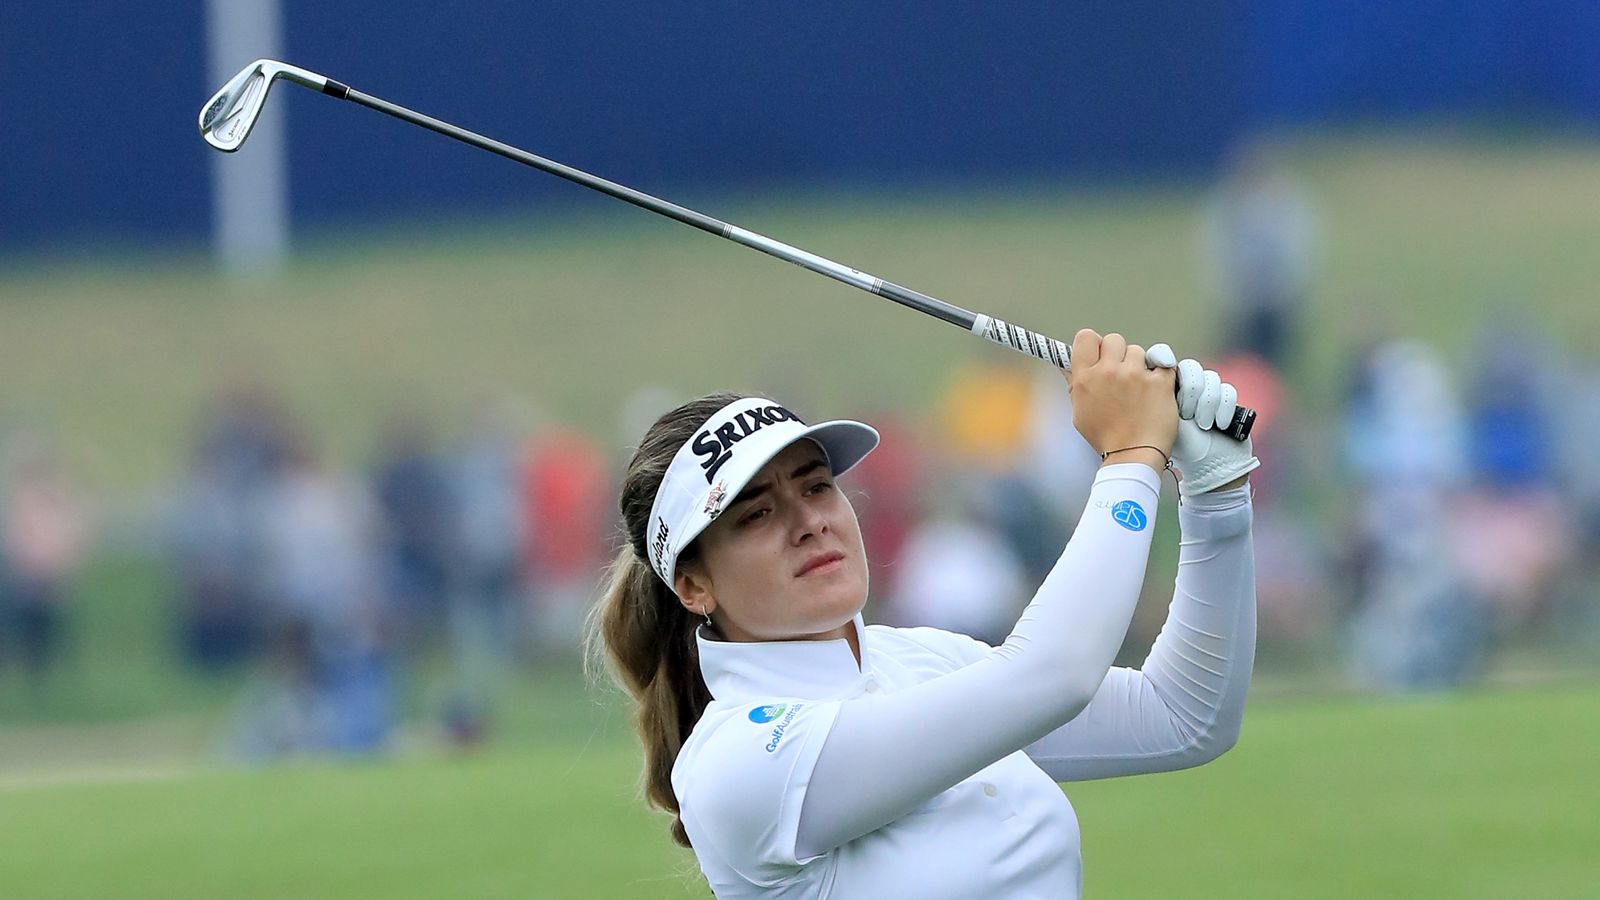 Hannah Green earns wire-to-wire win and first major at Women's PGA ...